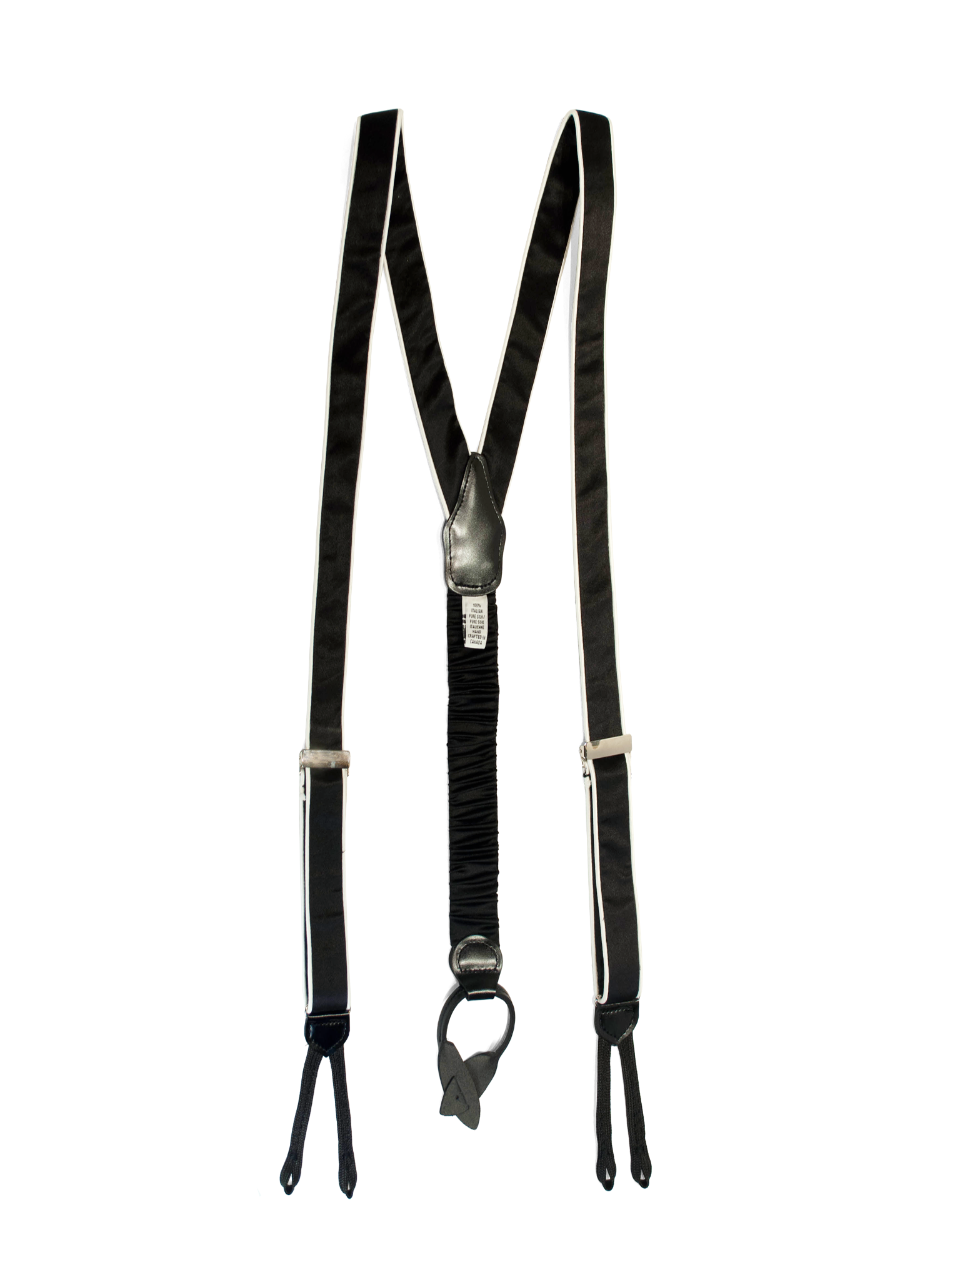 Black Silk Braces with White Piping made in canada